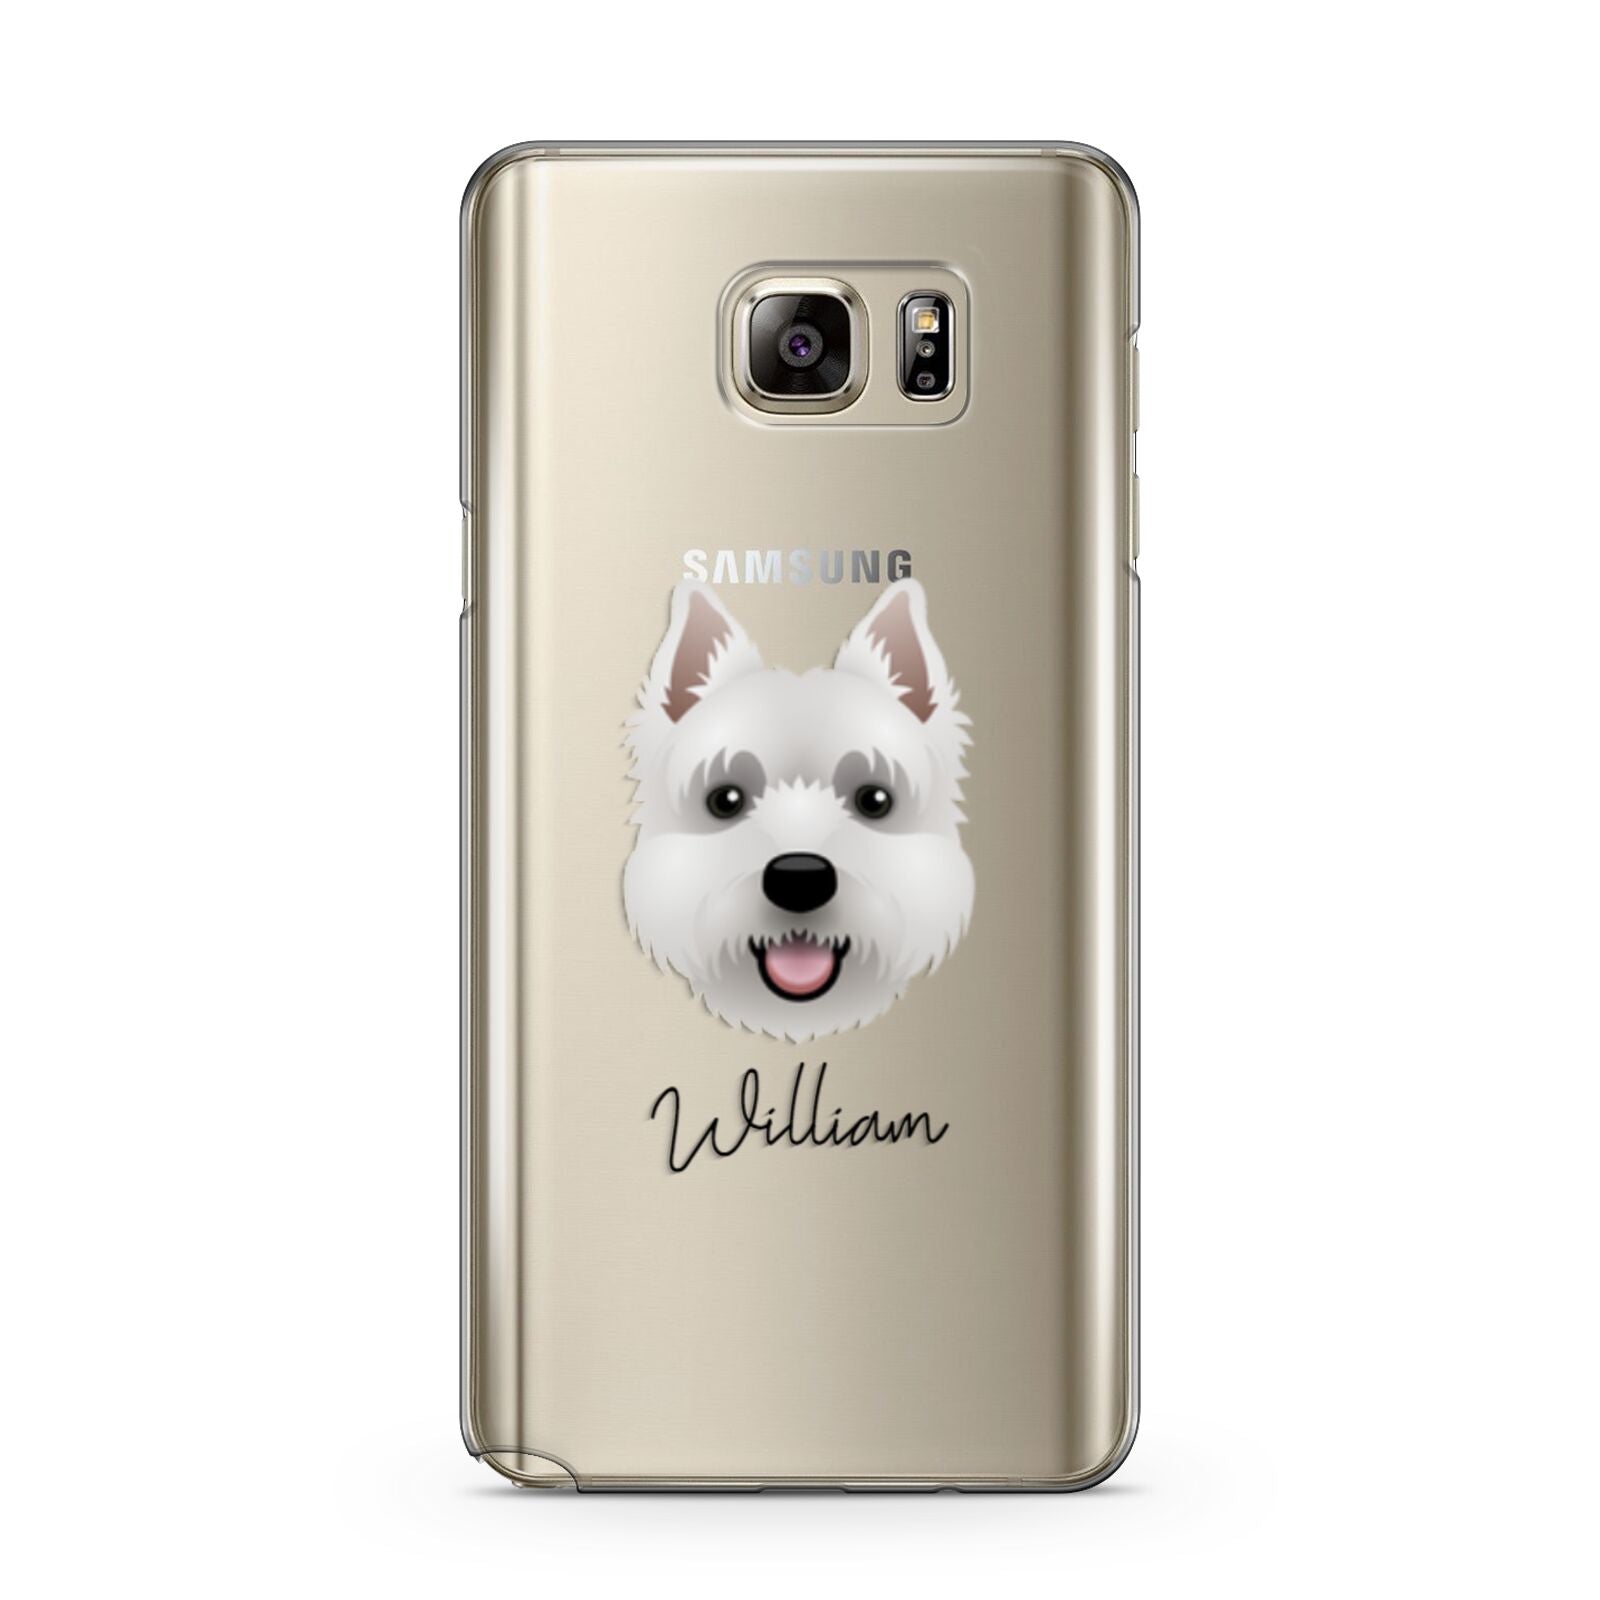 West Highland White Terrier Personalised Samsung Galaxy Note 5 Case